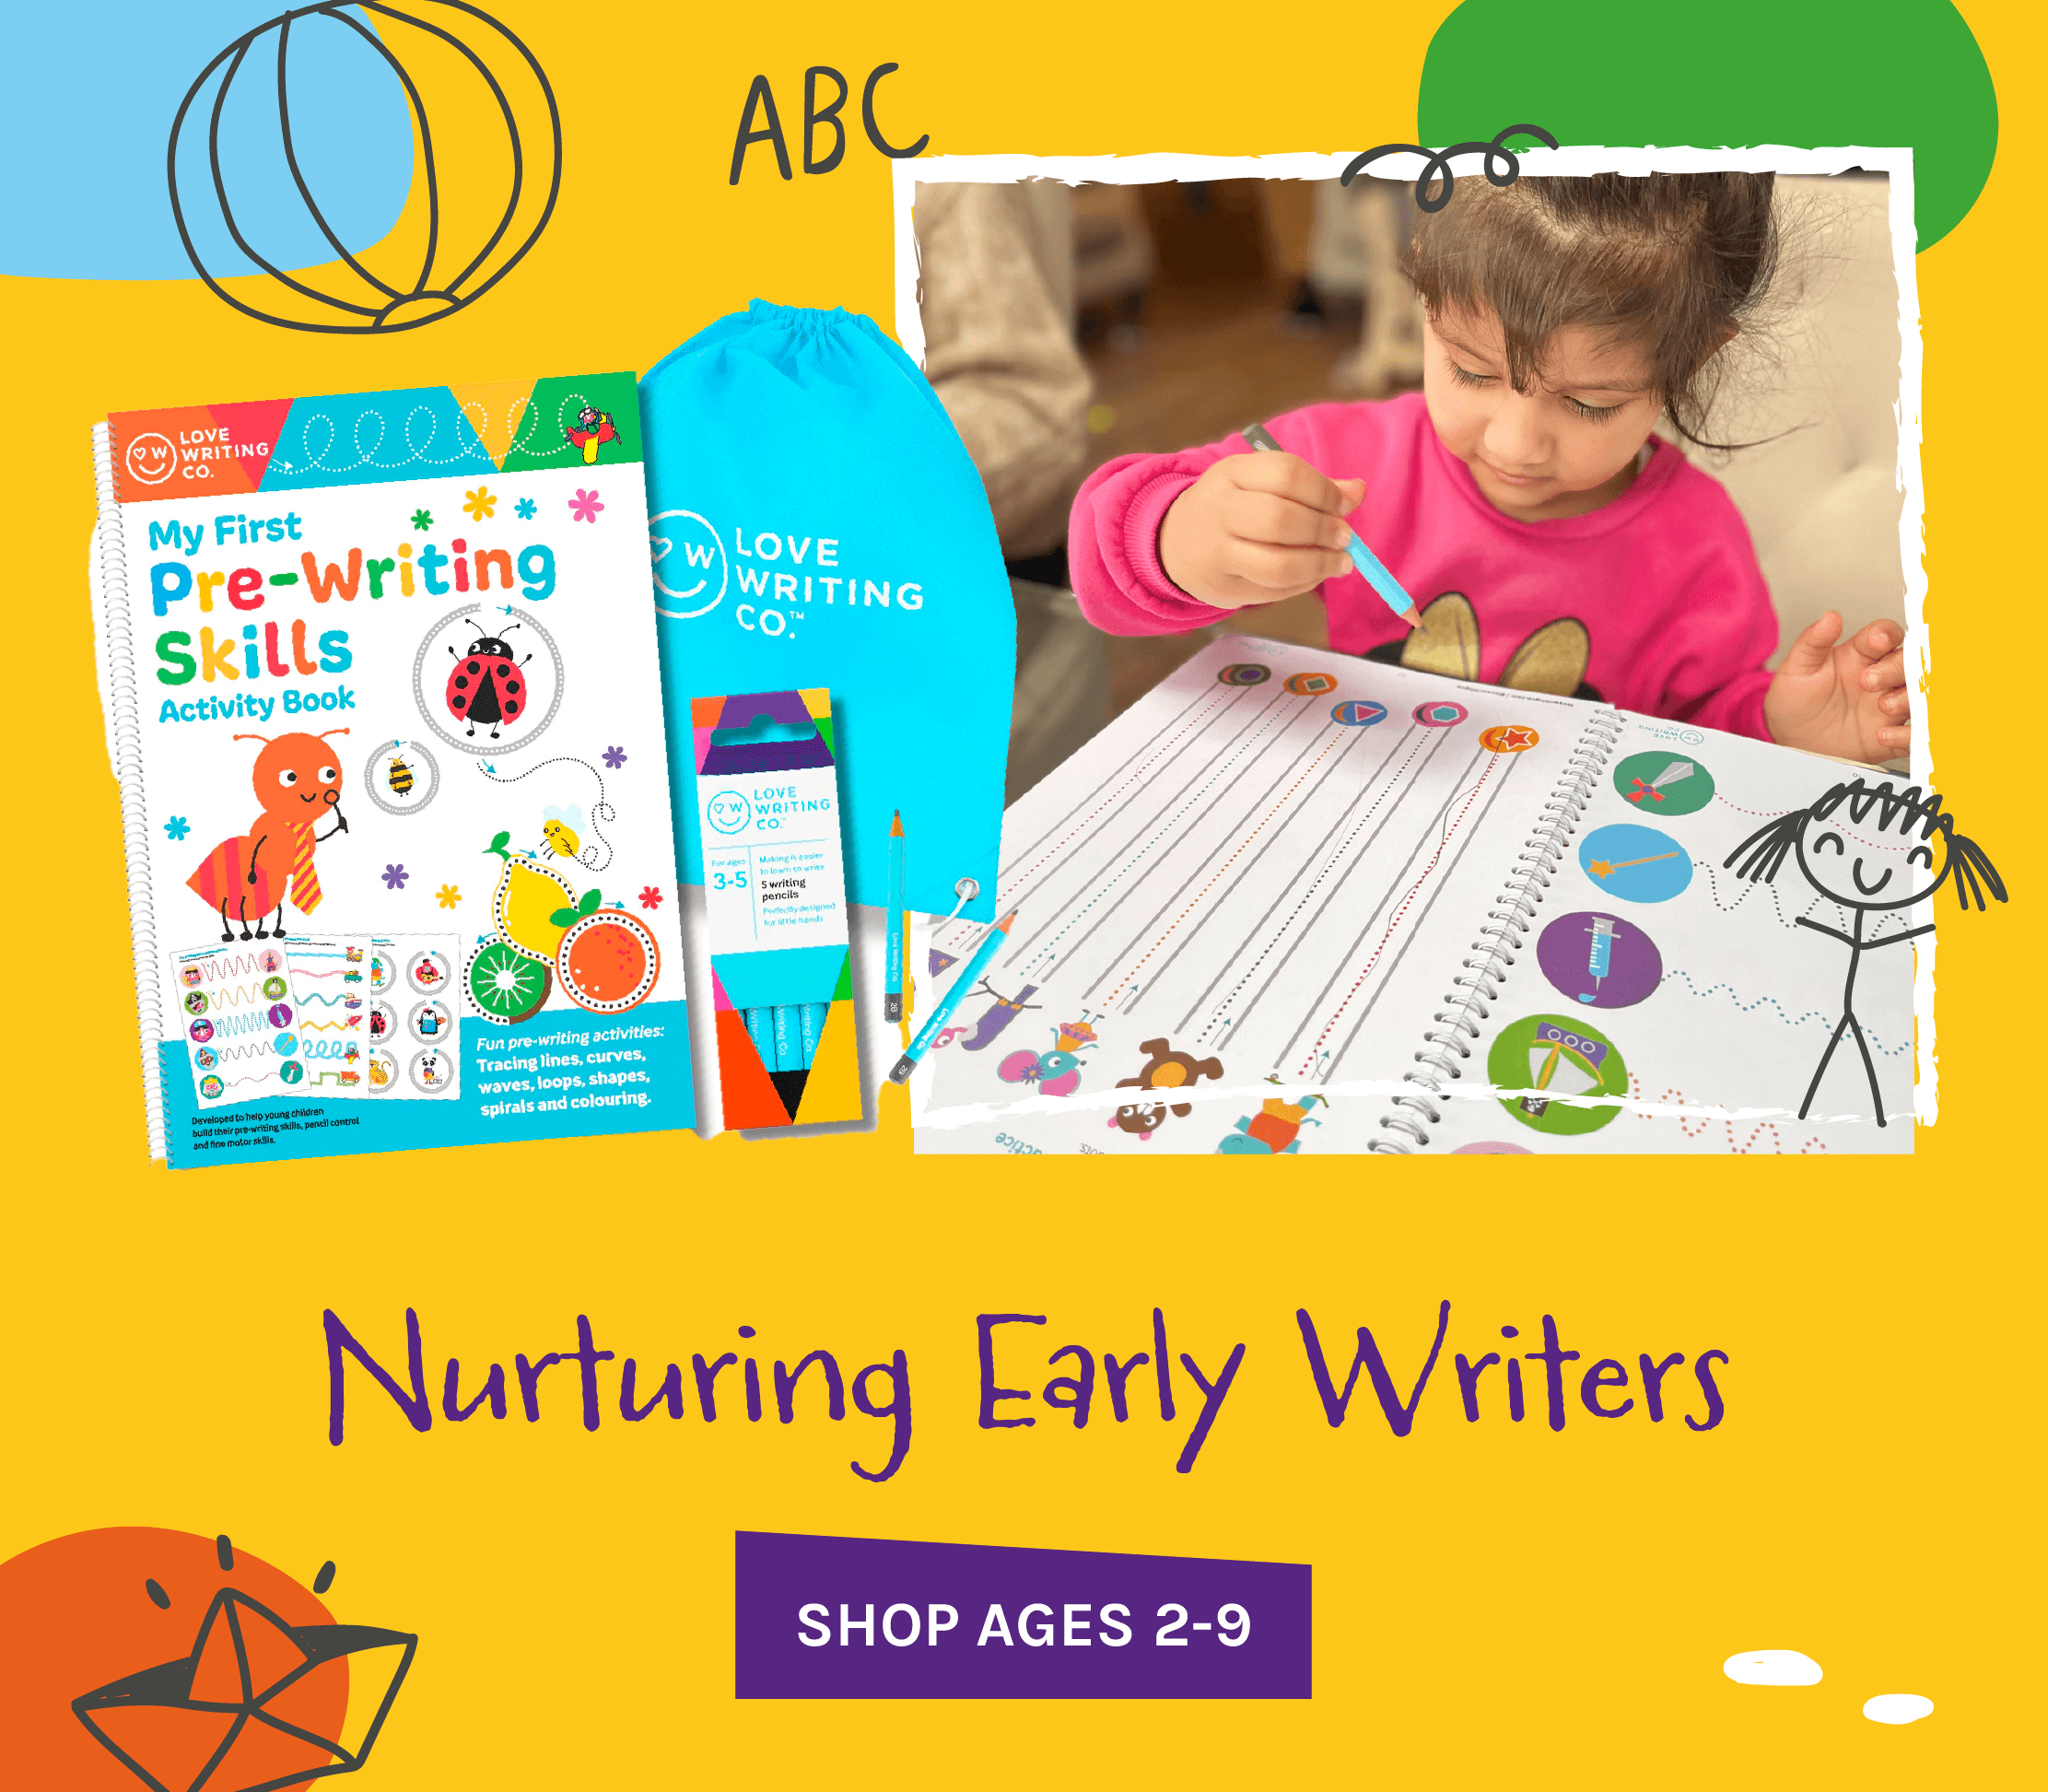 Abc Letters and Numbers Tracing Book for Kids: Letter Tracing Book For Kids  Ages 3-6: A Fun Practice Workbook To Learn The Alphabet. With drawings for